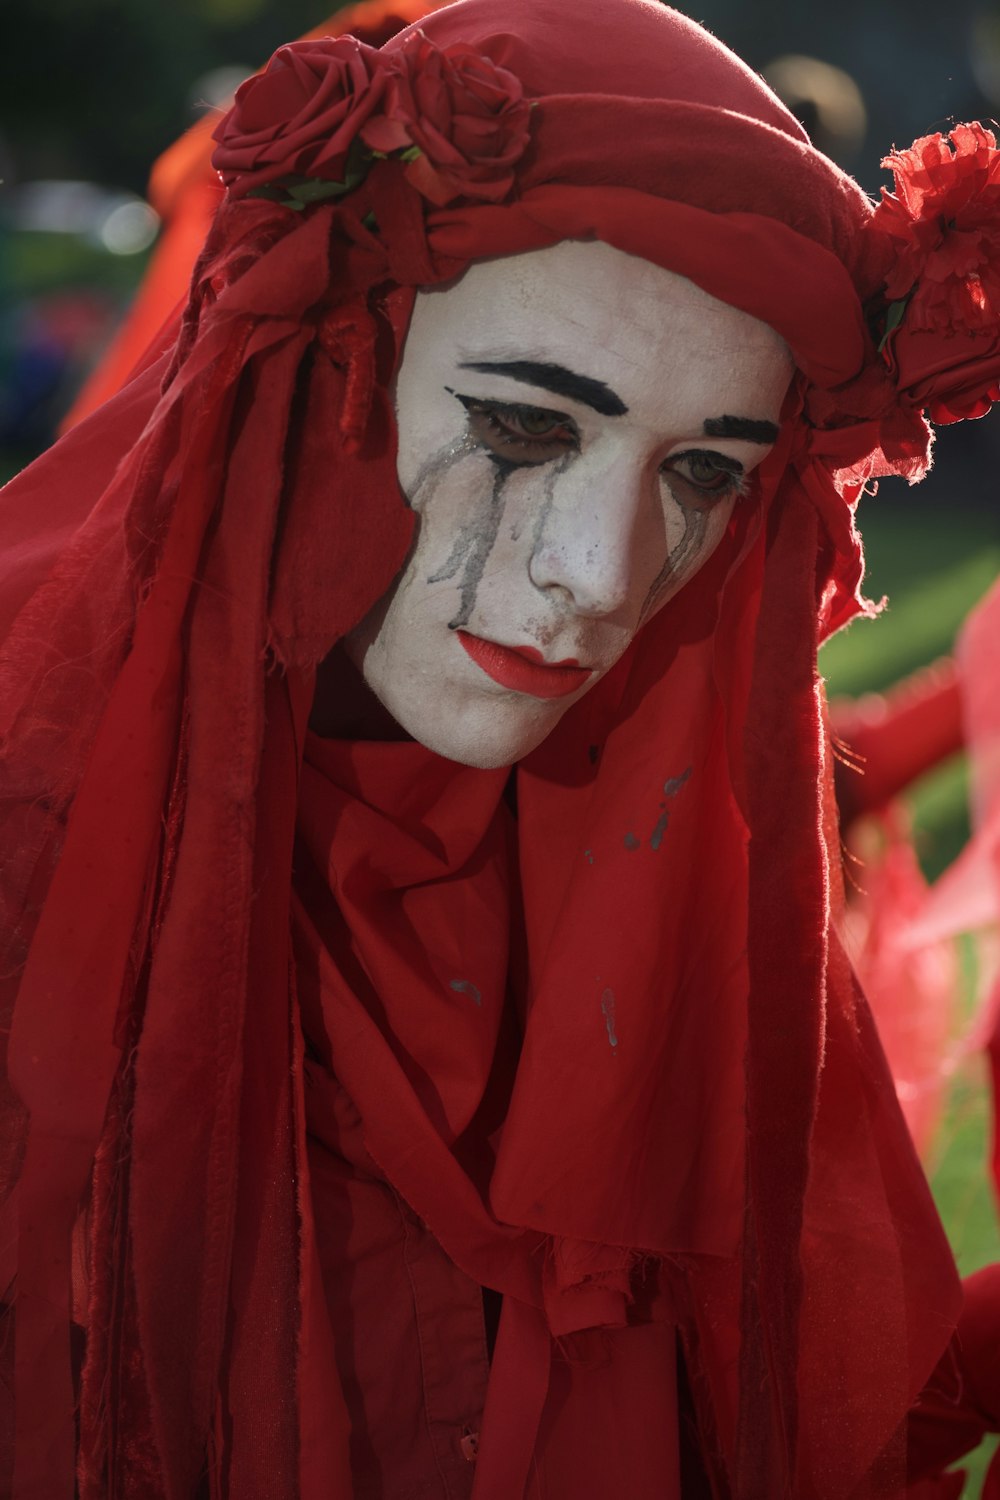 person in red dress with white face makeup